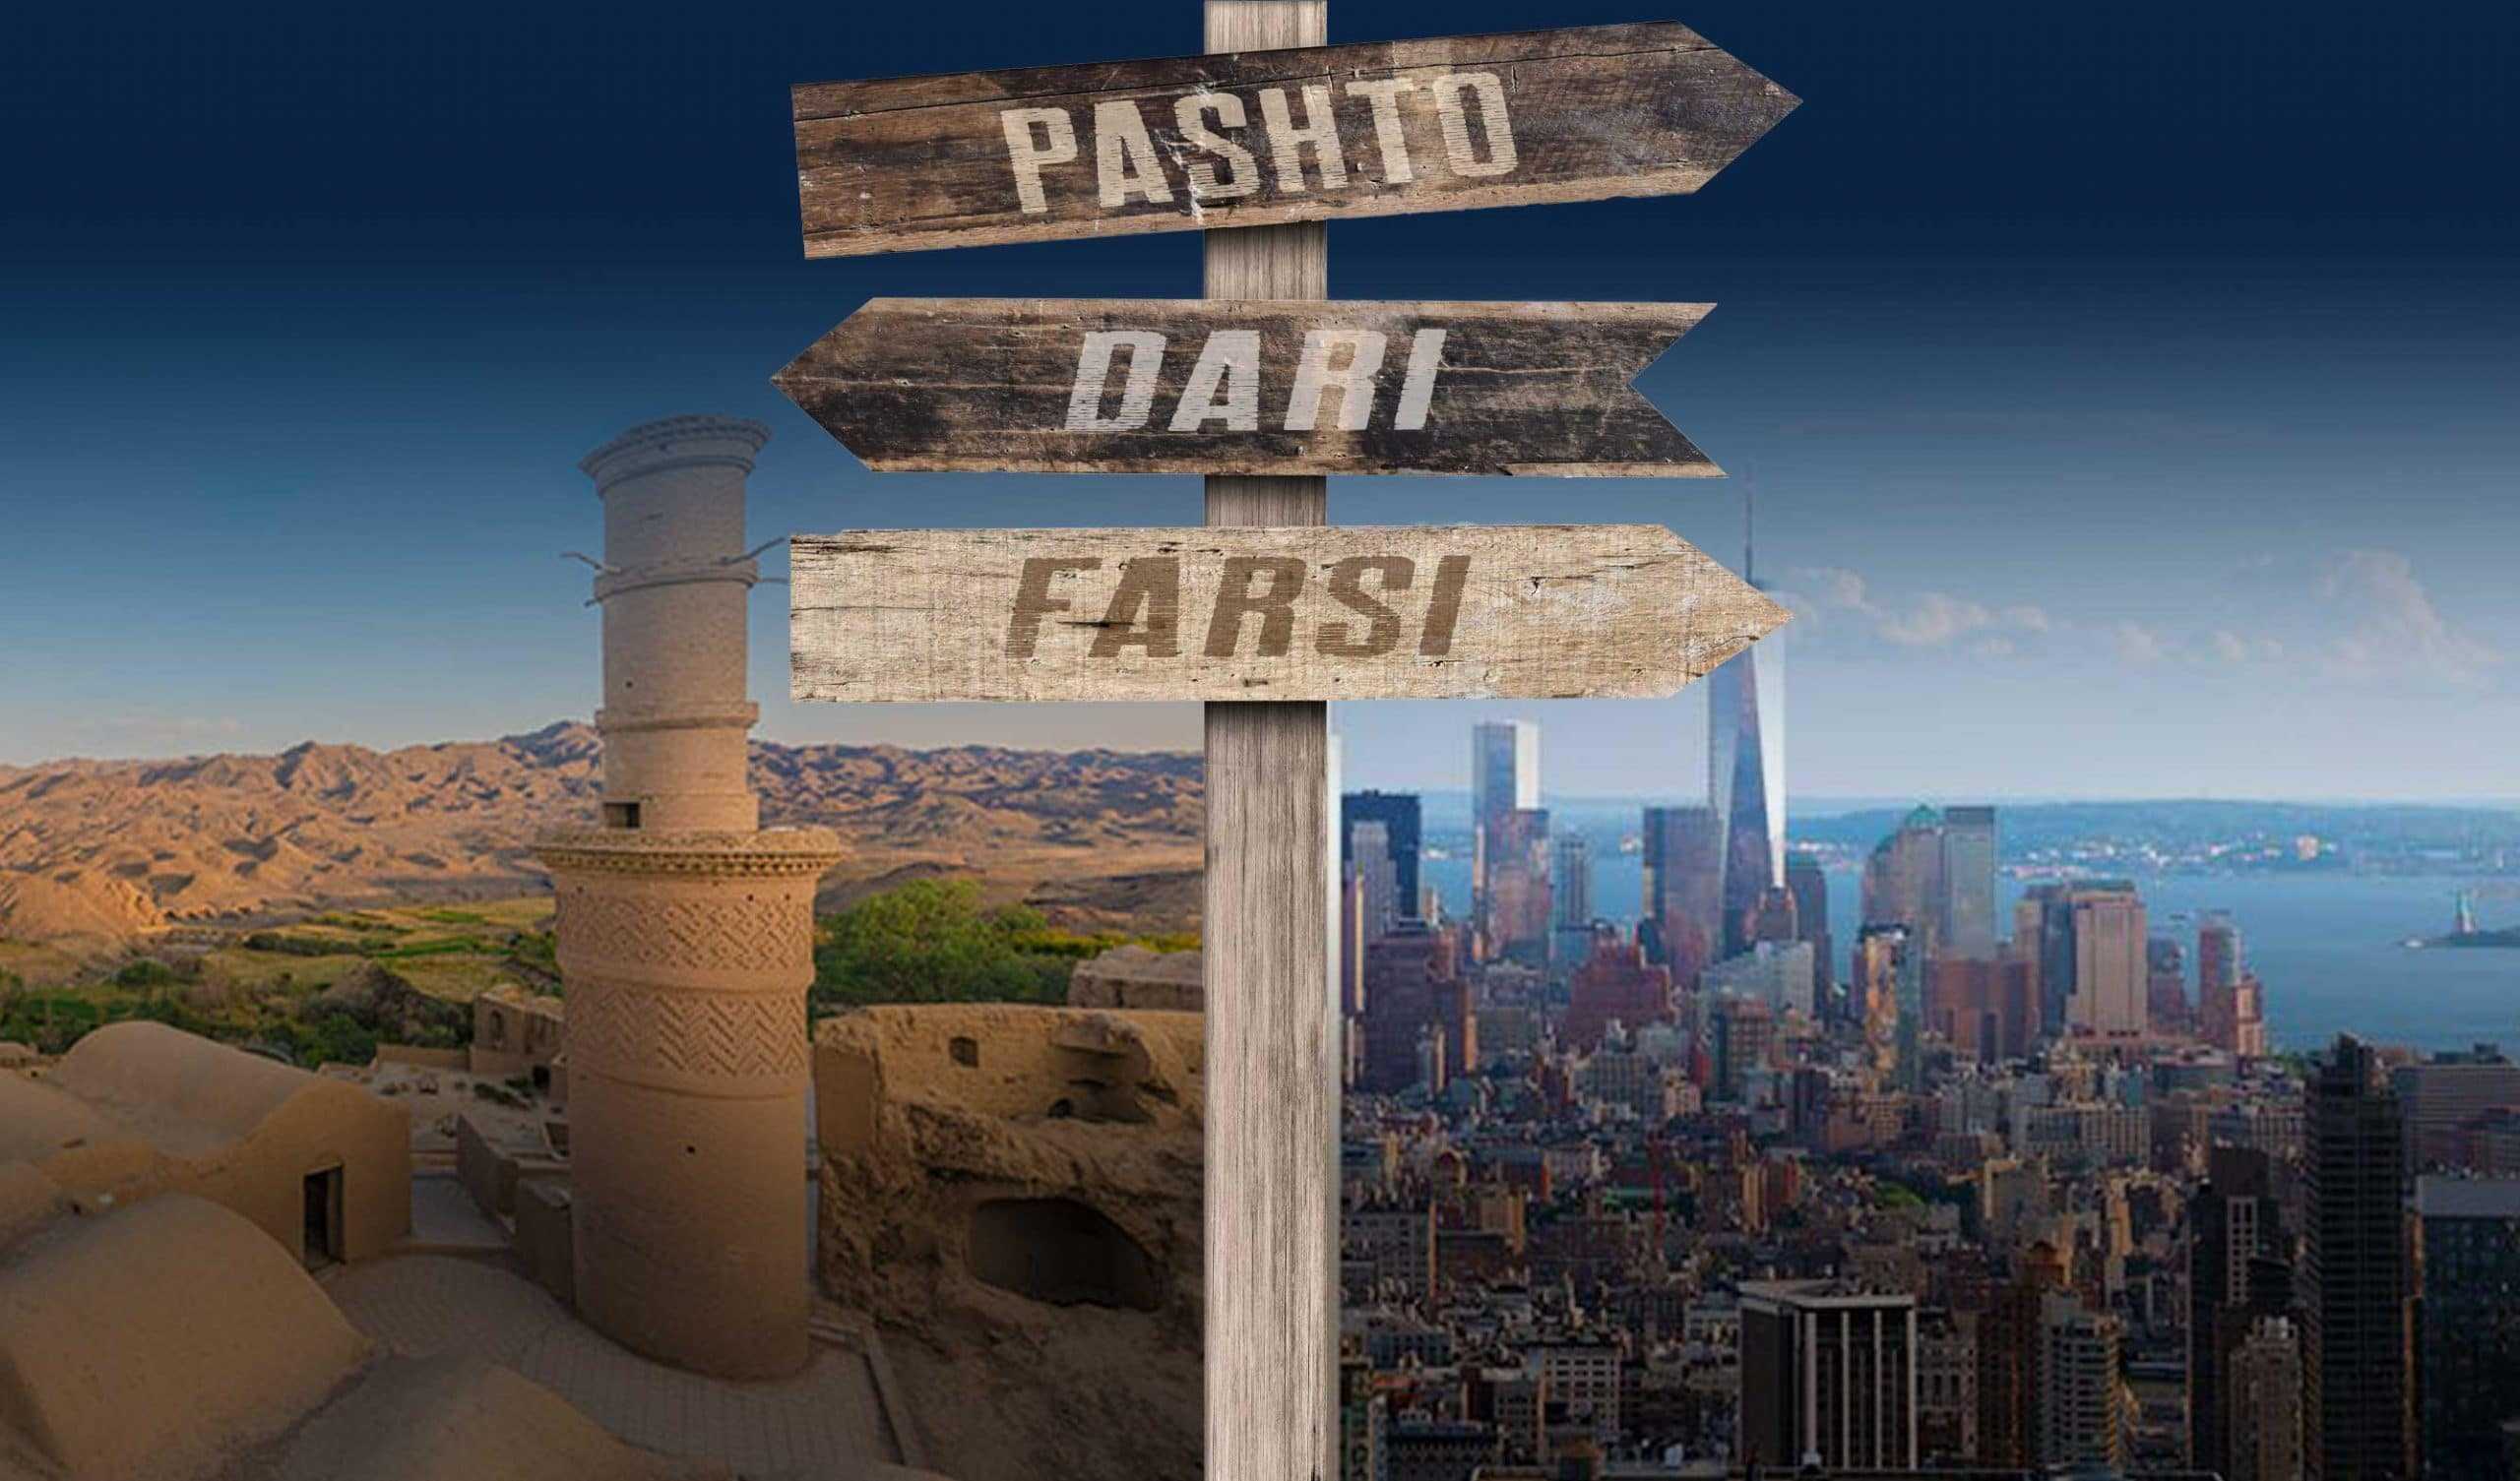 A wooden hiking trial sign pointing in different directions to Pashto Dari & Farsi